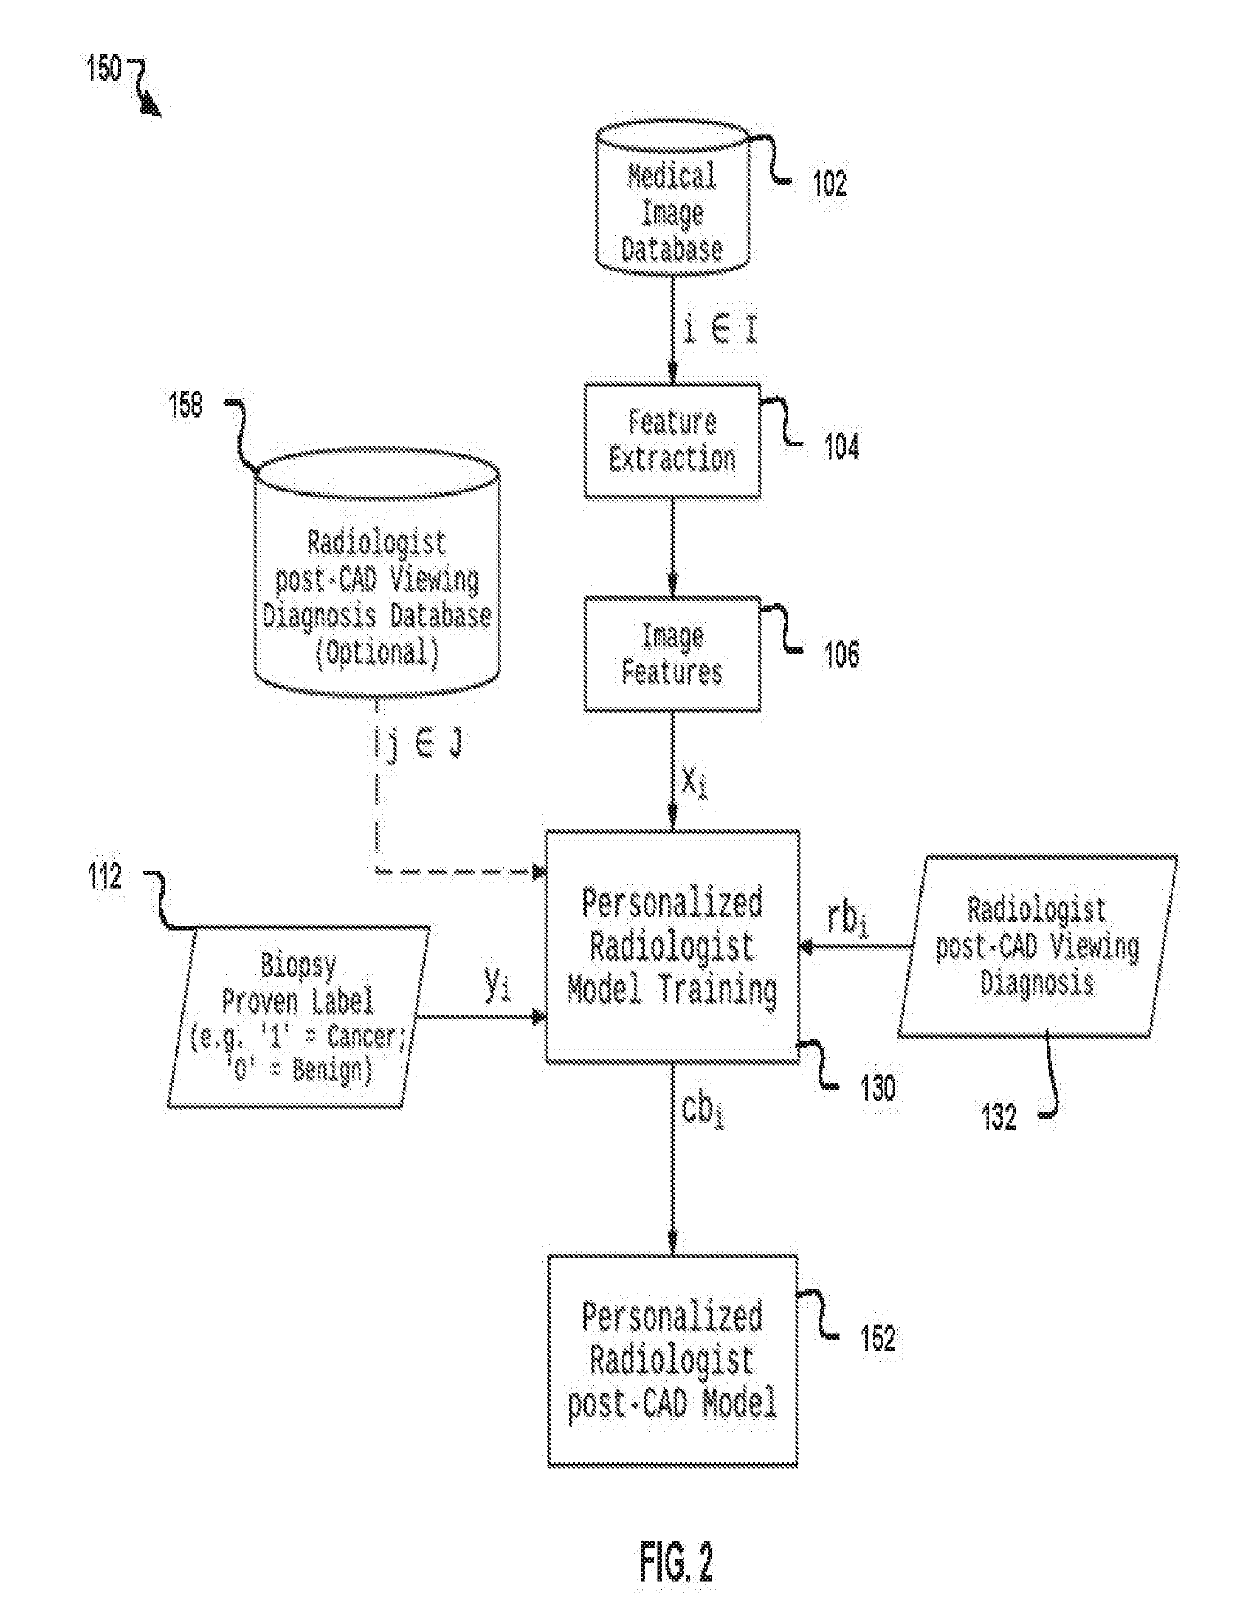 Method and means of cad system personalization to provide a confidence level indicator for cad system recommendations